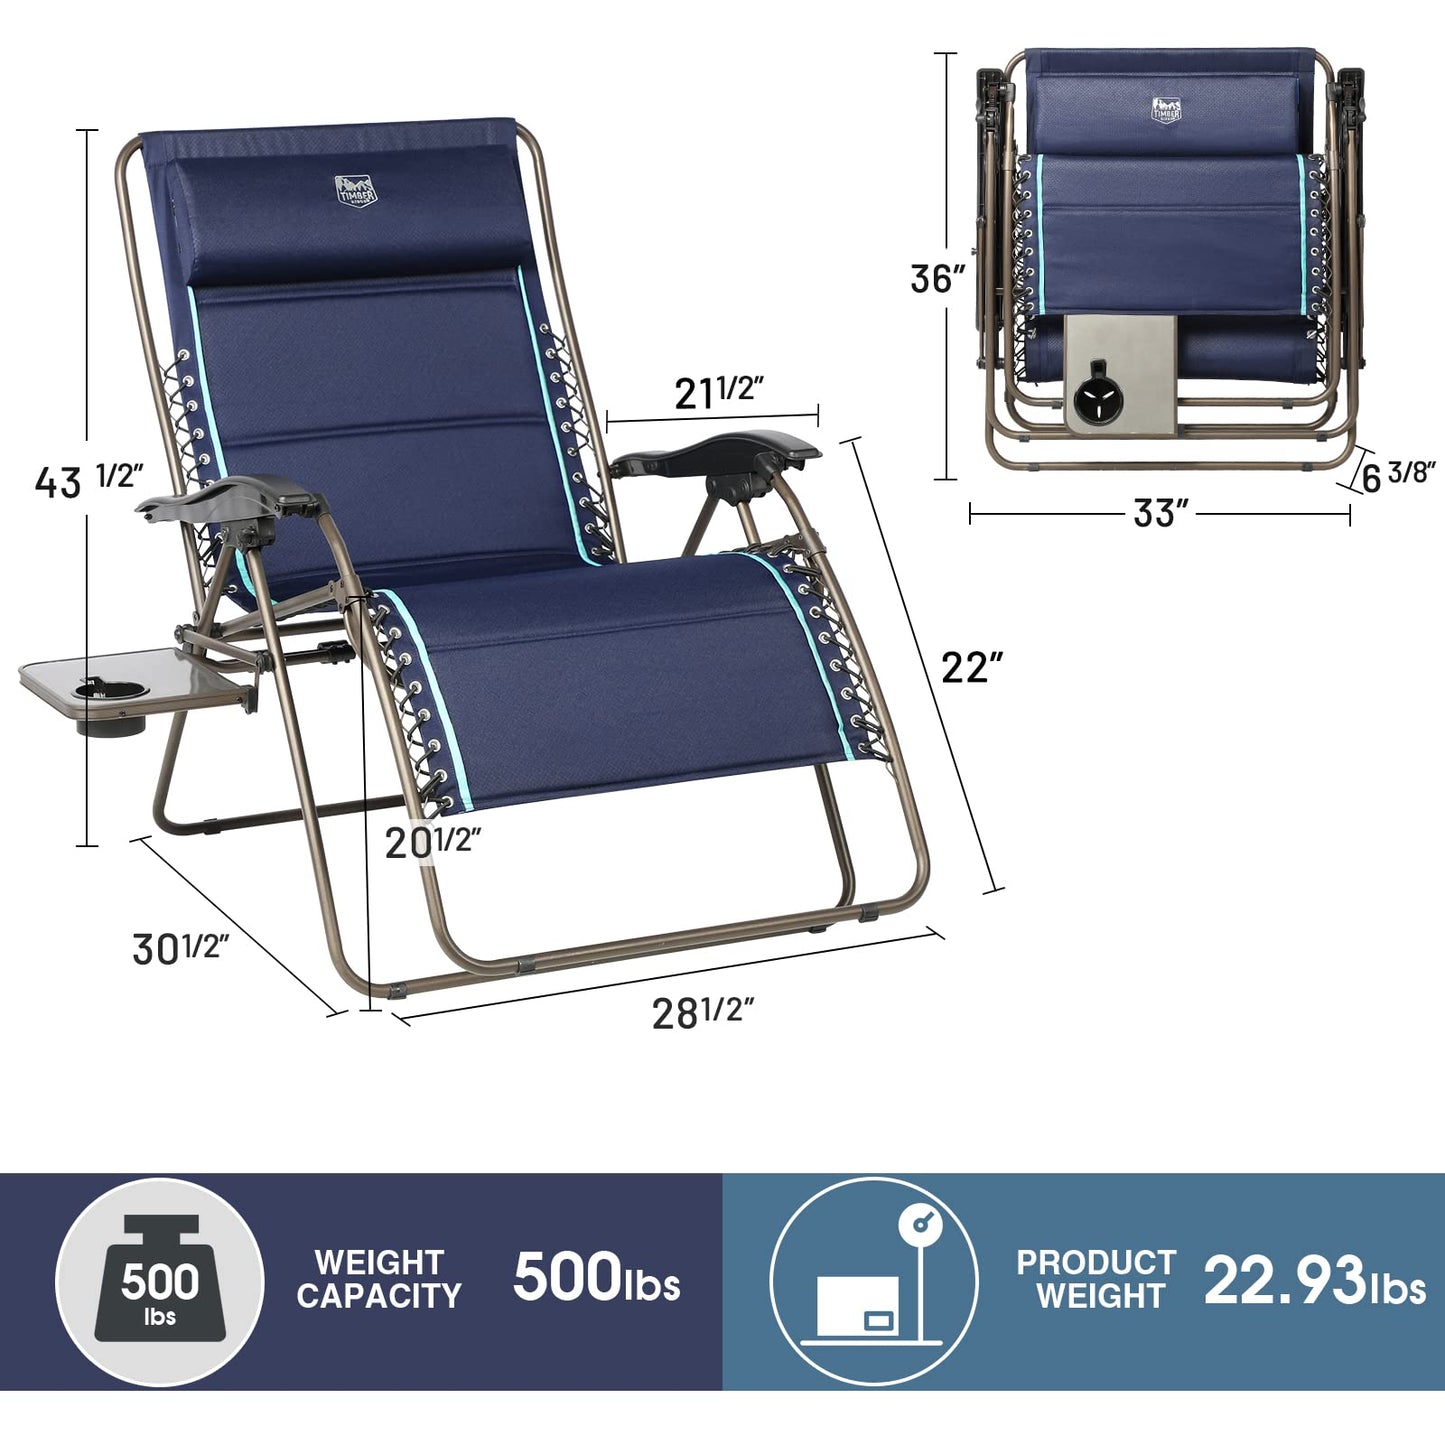 TIMBER RIDGE XXL Oversized Zero Gravity Chair, Full Padded Patio Lounger with Side Table, 33”Wide Reclining Lawn Chair, Support 500lbs(Blue) Blue